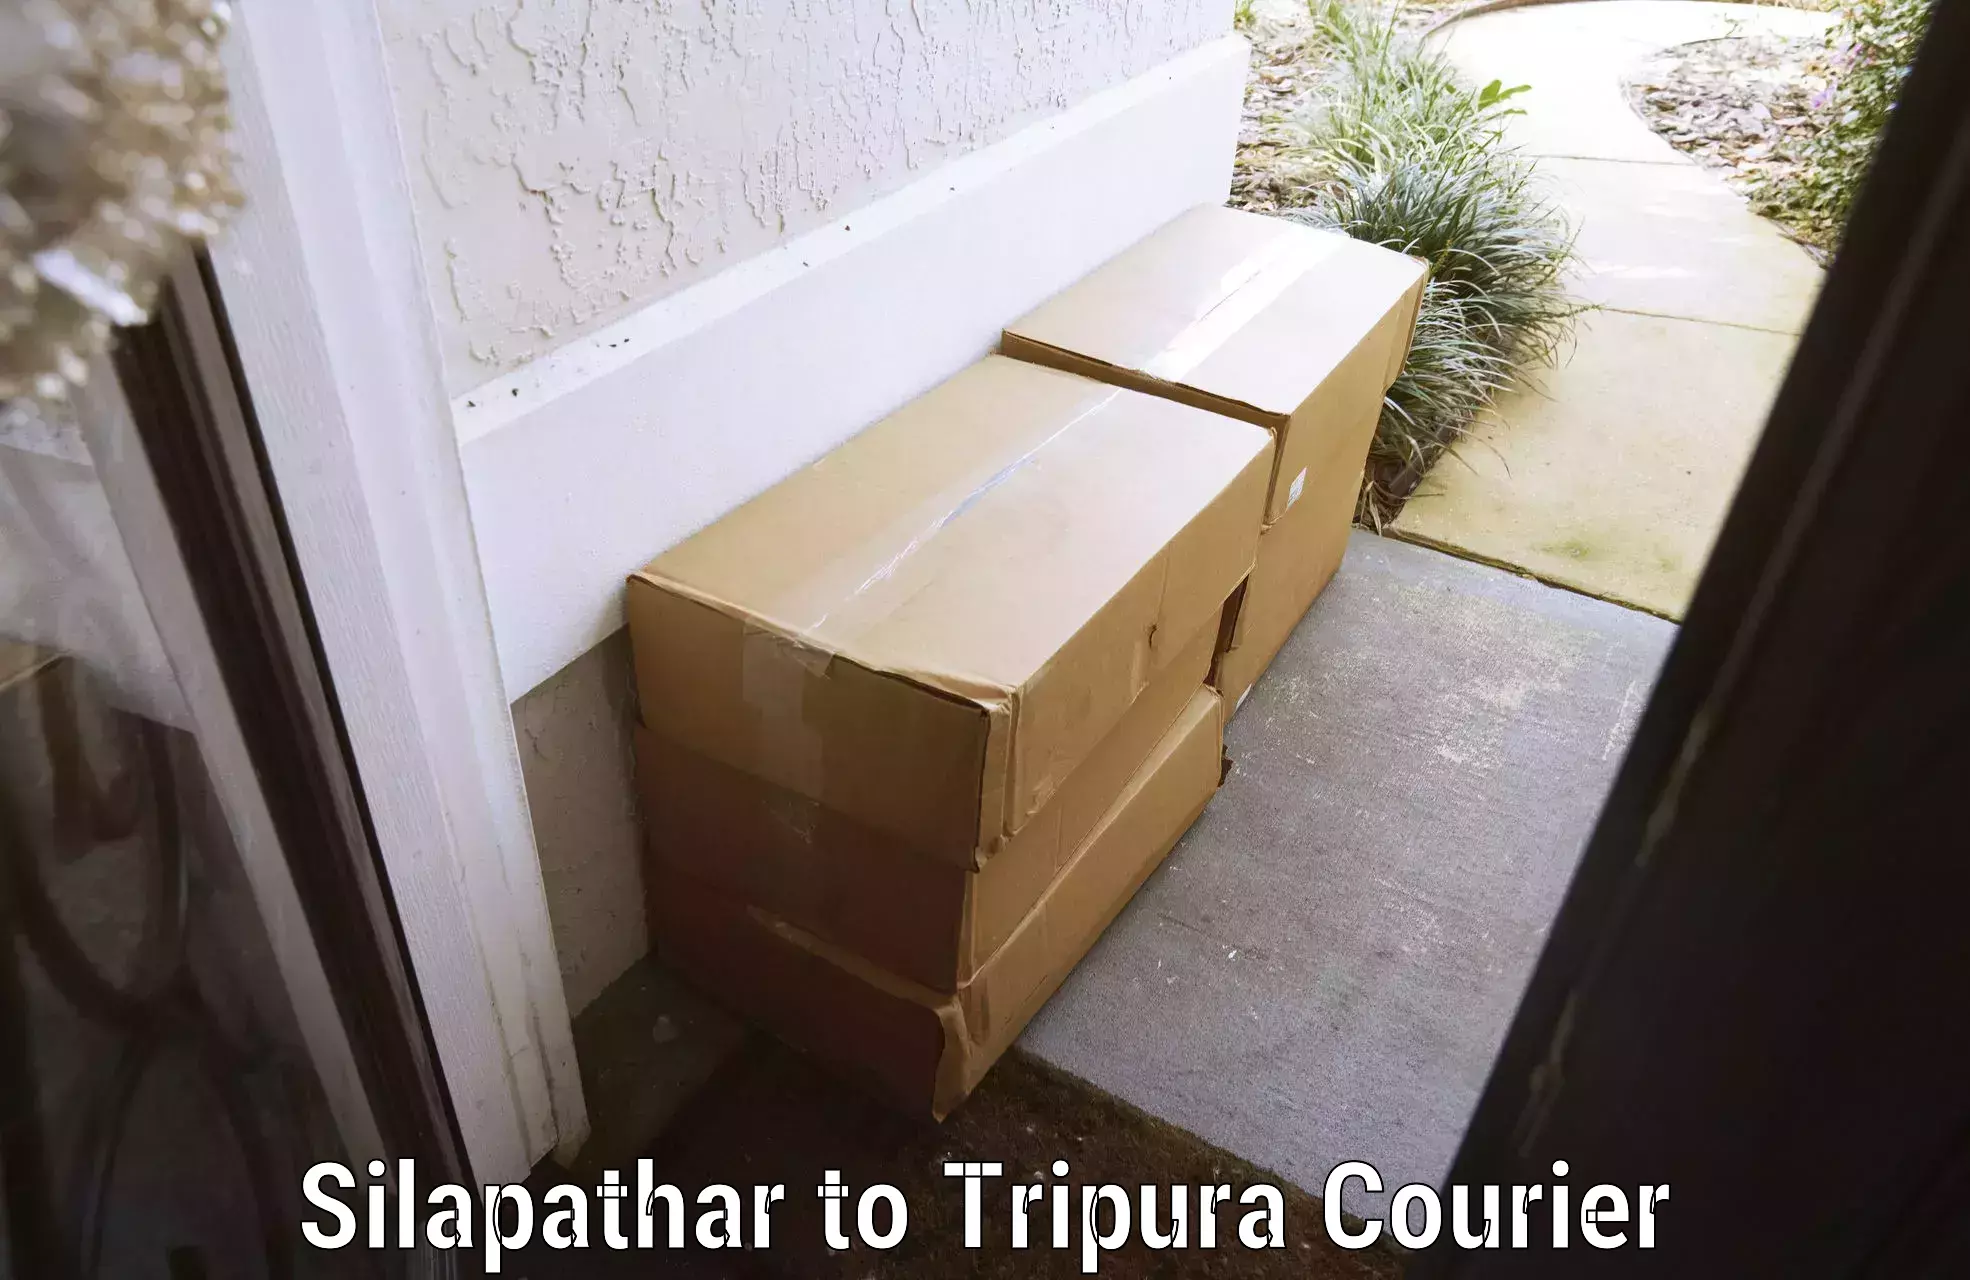 Emergency baggage service Silapathar to South Tripura